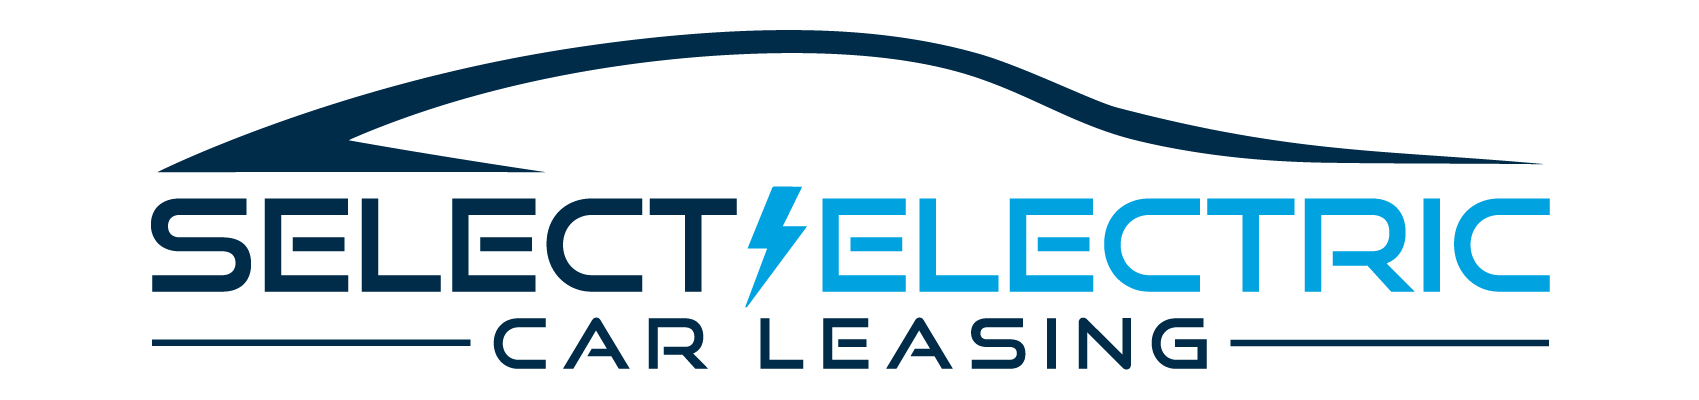 Select Car Leasing electric cars